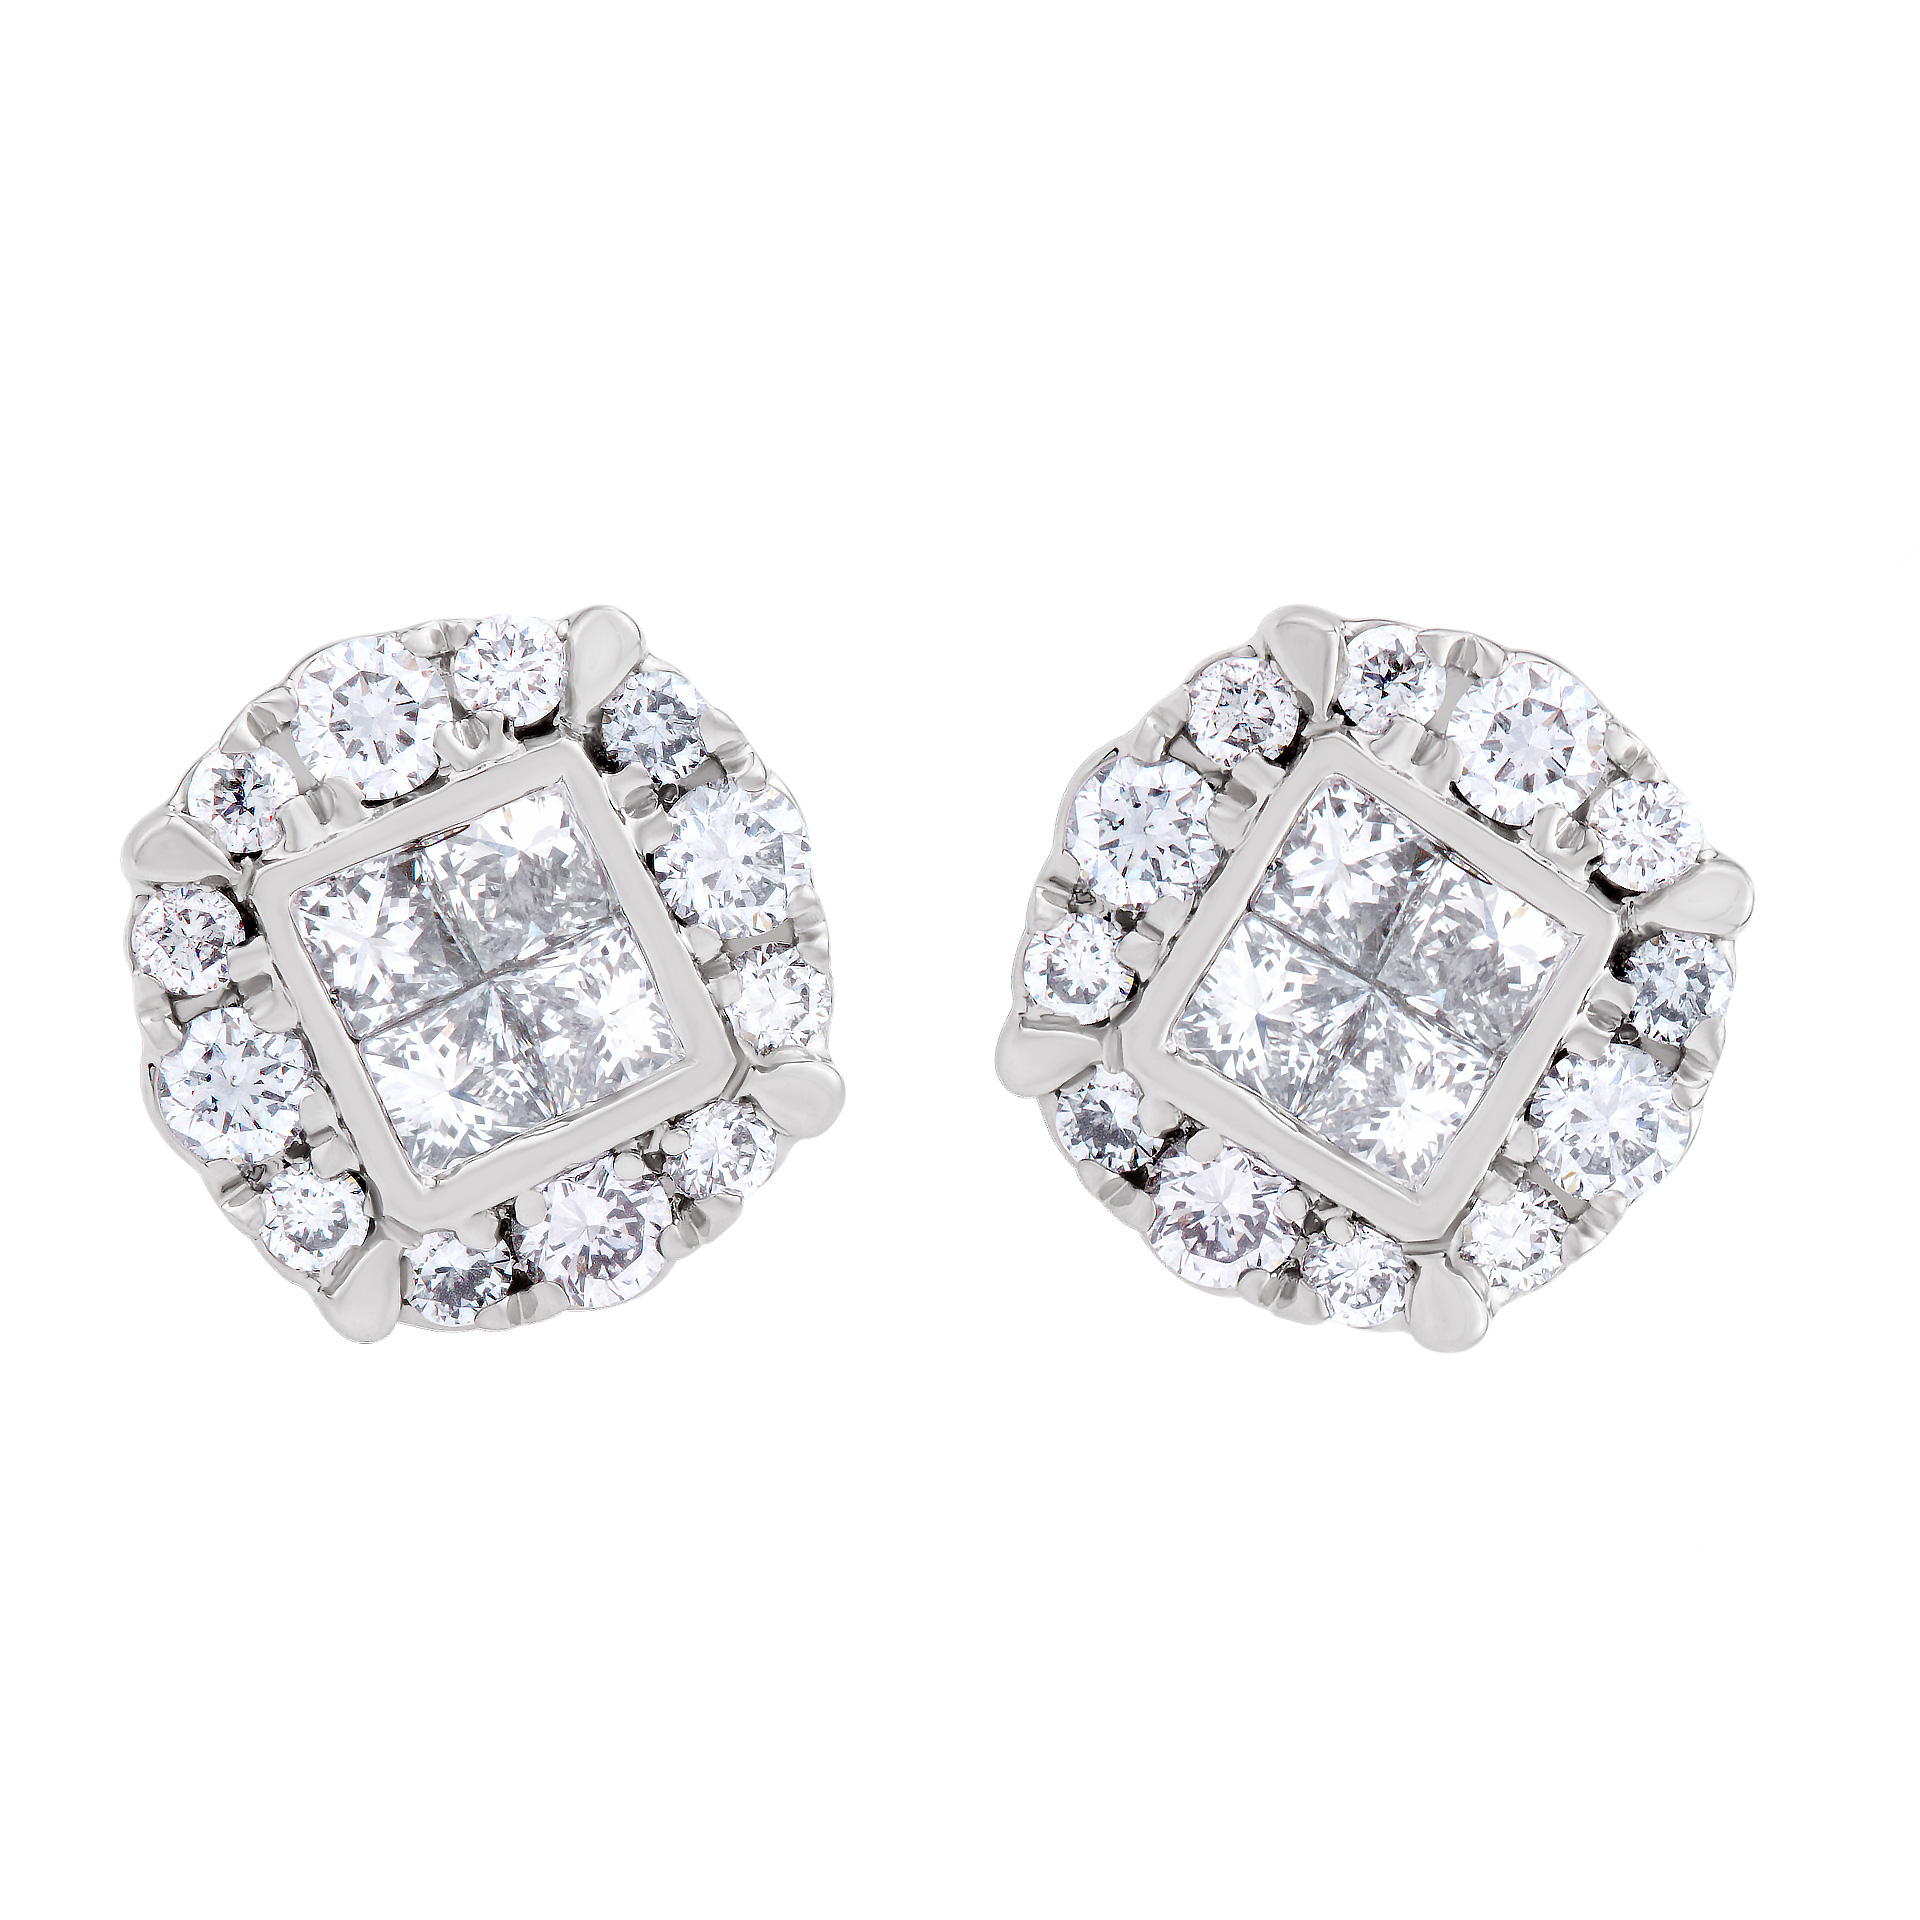 Diamond studs in 18k white gold. 1.01 carats image 1